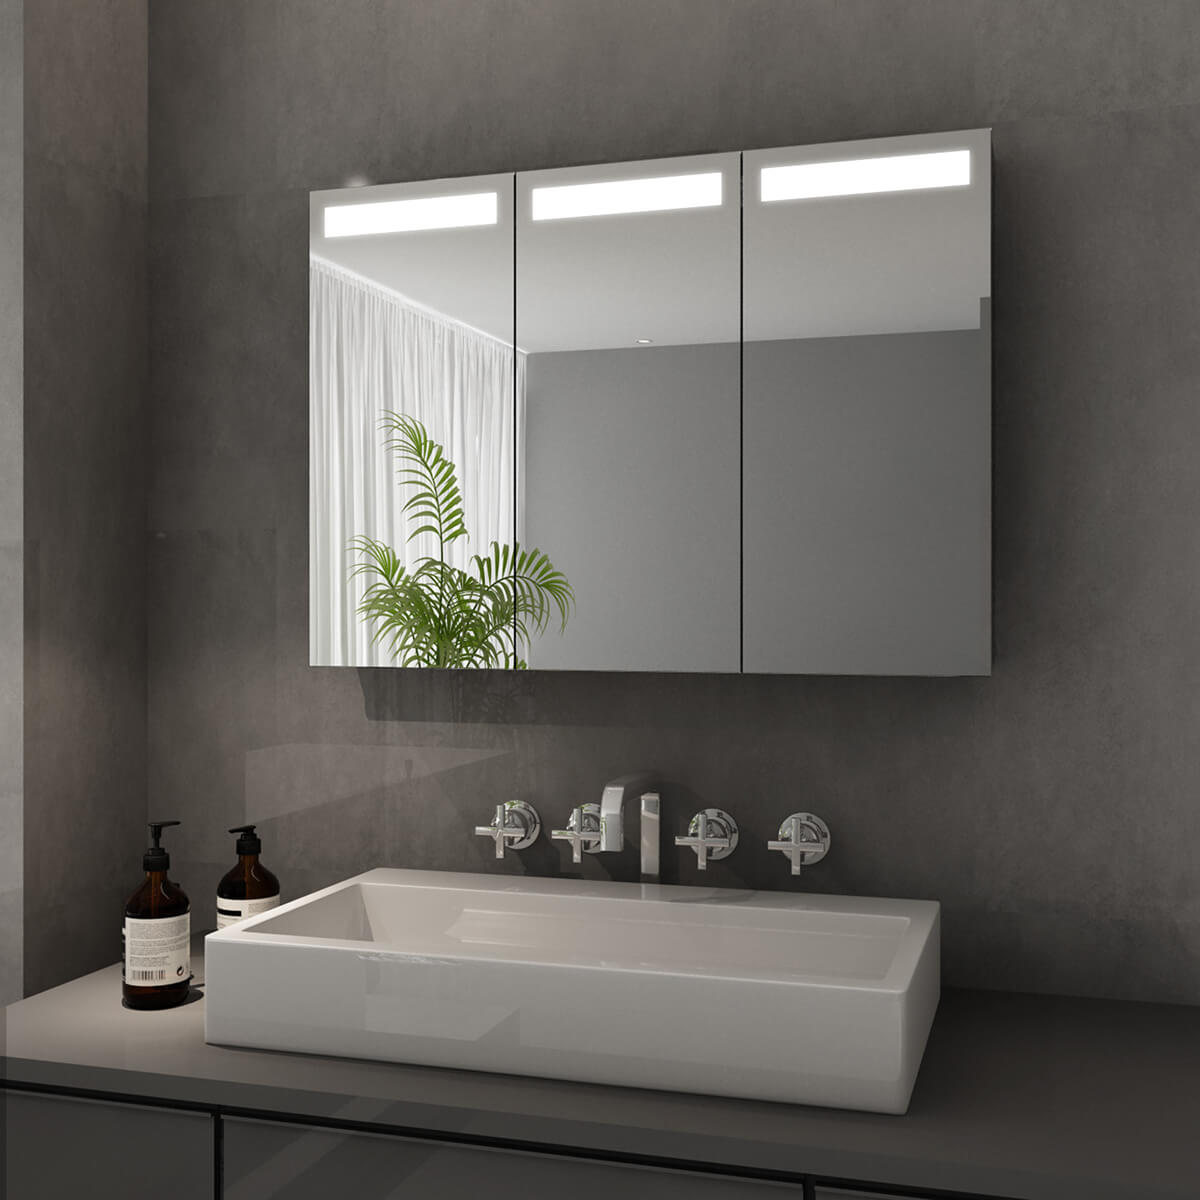 SONNI Bathroom Mirror Cabinet with Lighting, 3-Door Stainless Steel LED Mirror Cabinet 90 x 65 x 13 cm